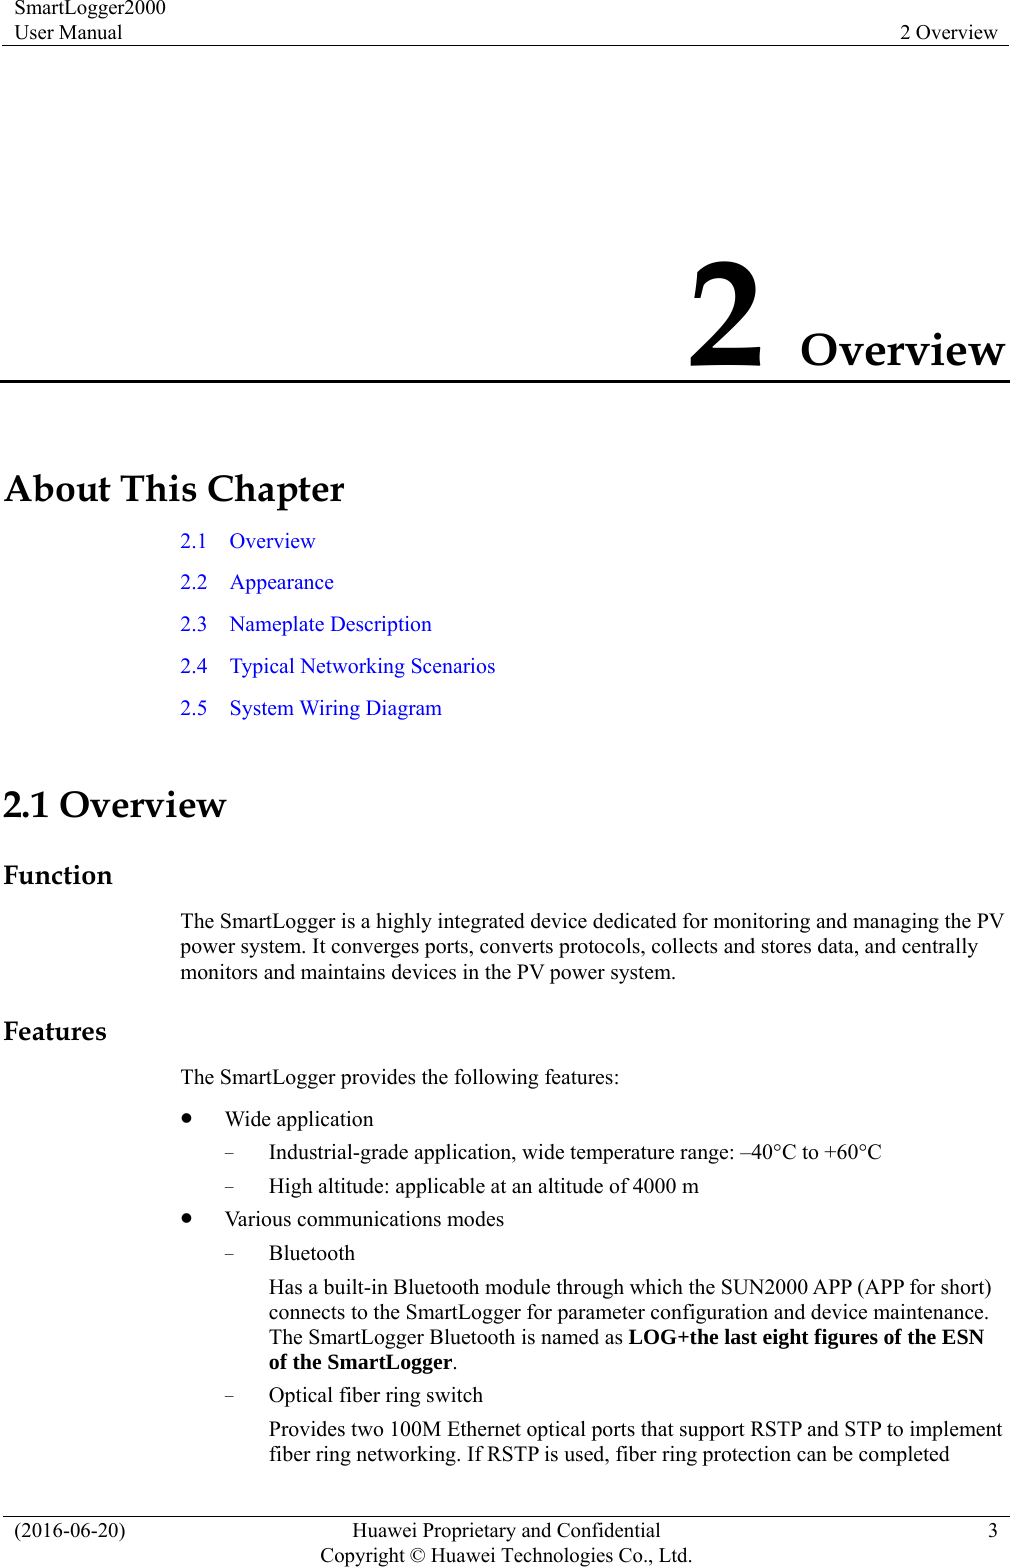 SmartLogger2000 User Manual  2 Overview (2016-06-20)  Huawei Proprietary and Confidential         Copyright © Huawei Technologies Co., Ltd.3 2 Overview About This Chapter 2.1  Overview 2.2  Appearance 2.3  Nameplate Description 2.4  Typical Networking Scenarios 2.5  System Wiring Diagram 2.1 Overview Function The SmartLogger is a highly integrated device dedicated for monitoring and managing the PV power system. It converges ports, converts protocols, collects and stores data, and centrally monitors and maintains devices in the PV power system.   Features The SmartLogger provides the following features:  Wide application − Industrial-grade application, wide temperature range: –40°C to +60°C − High altitude: applicable at an altitude of 4000 m  Various communications modes − Bluetooth Has a built-in Bluetooth module through which the SUN2000 APP (APP for short) connects to the SmartLogger for parameter configuration and device maintenance. The SmartLogger Bluetooth is named as LOG+the last eight figures of the ESN of the SmartLogger. − Optical fiber ring switch Provides two 100M Ethernet optical ports that support RSTP and STP to implement fiber ring networking. If RSTP is used, fiber ring protection can be completed 